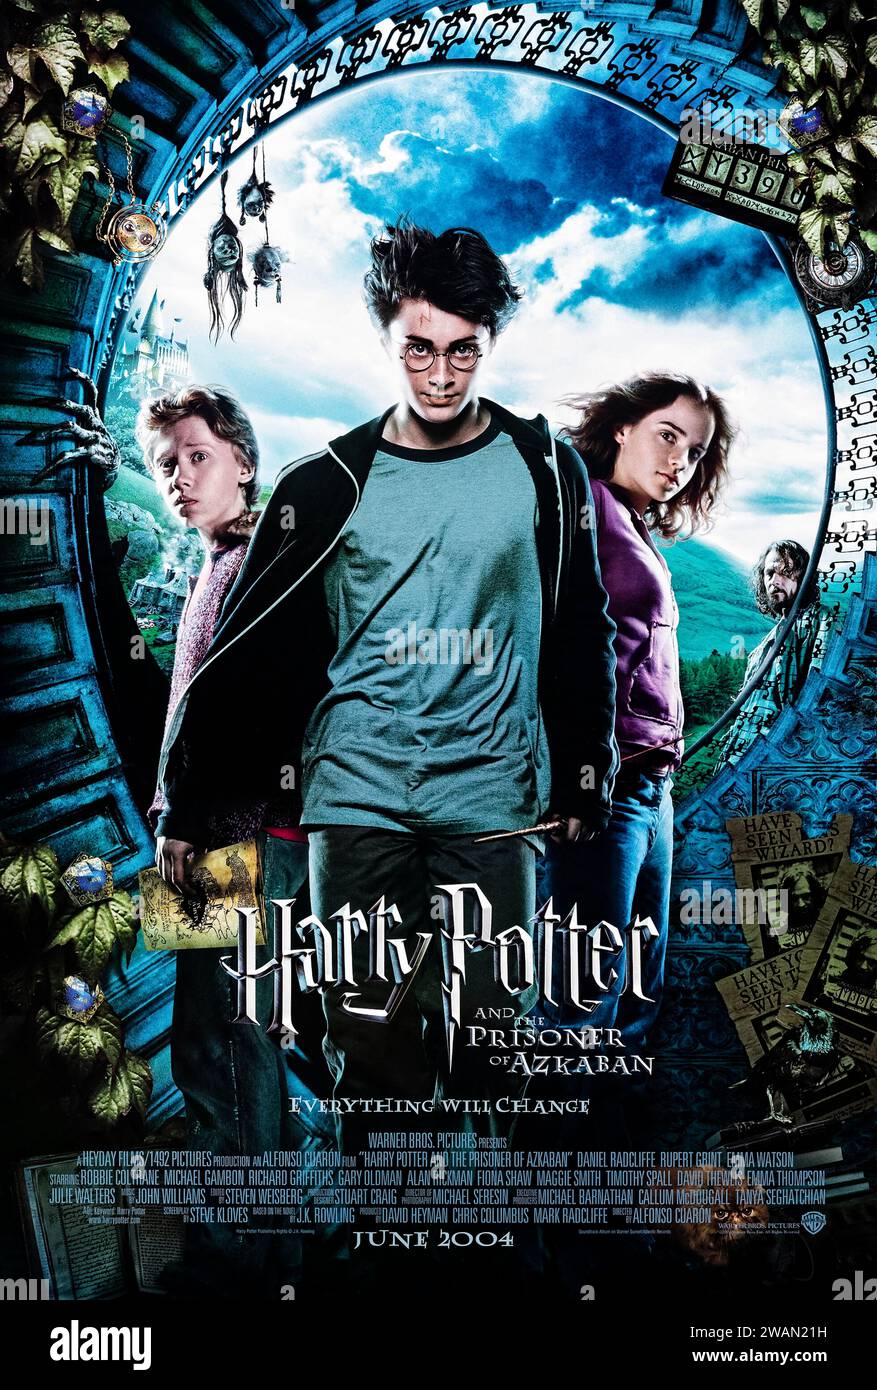 Harry Potter and the Prisoner of Azkaban (2004) directed by Alfonso Cuarón and starring Daniel Radcliffe, Emma Watson and Rupert Grint. Harry Potter, Ron and Hermione return to Hogwarts School of Witchcraft and Wizardry for their third year of study, where they delve into the mystery surrounding an escaped prisoner who poses a dangerous threat to the young wizard. Photograph of an original 2004 US one sheet poster. ***EDITORIAL USE ONLY*** Credit: BFA / Warner Bros Stock Photo